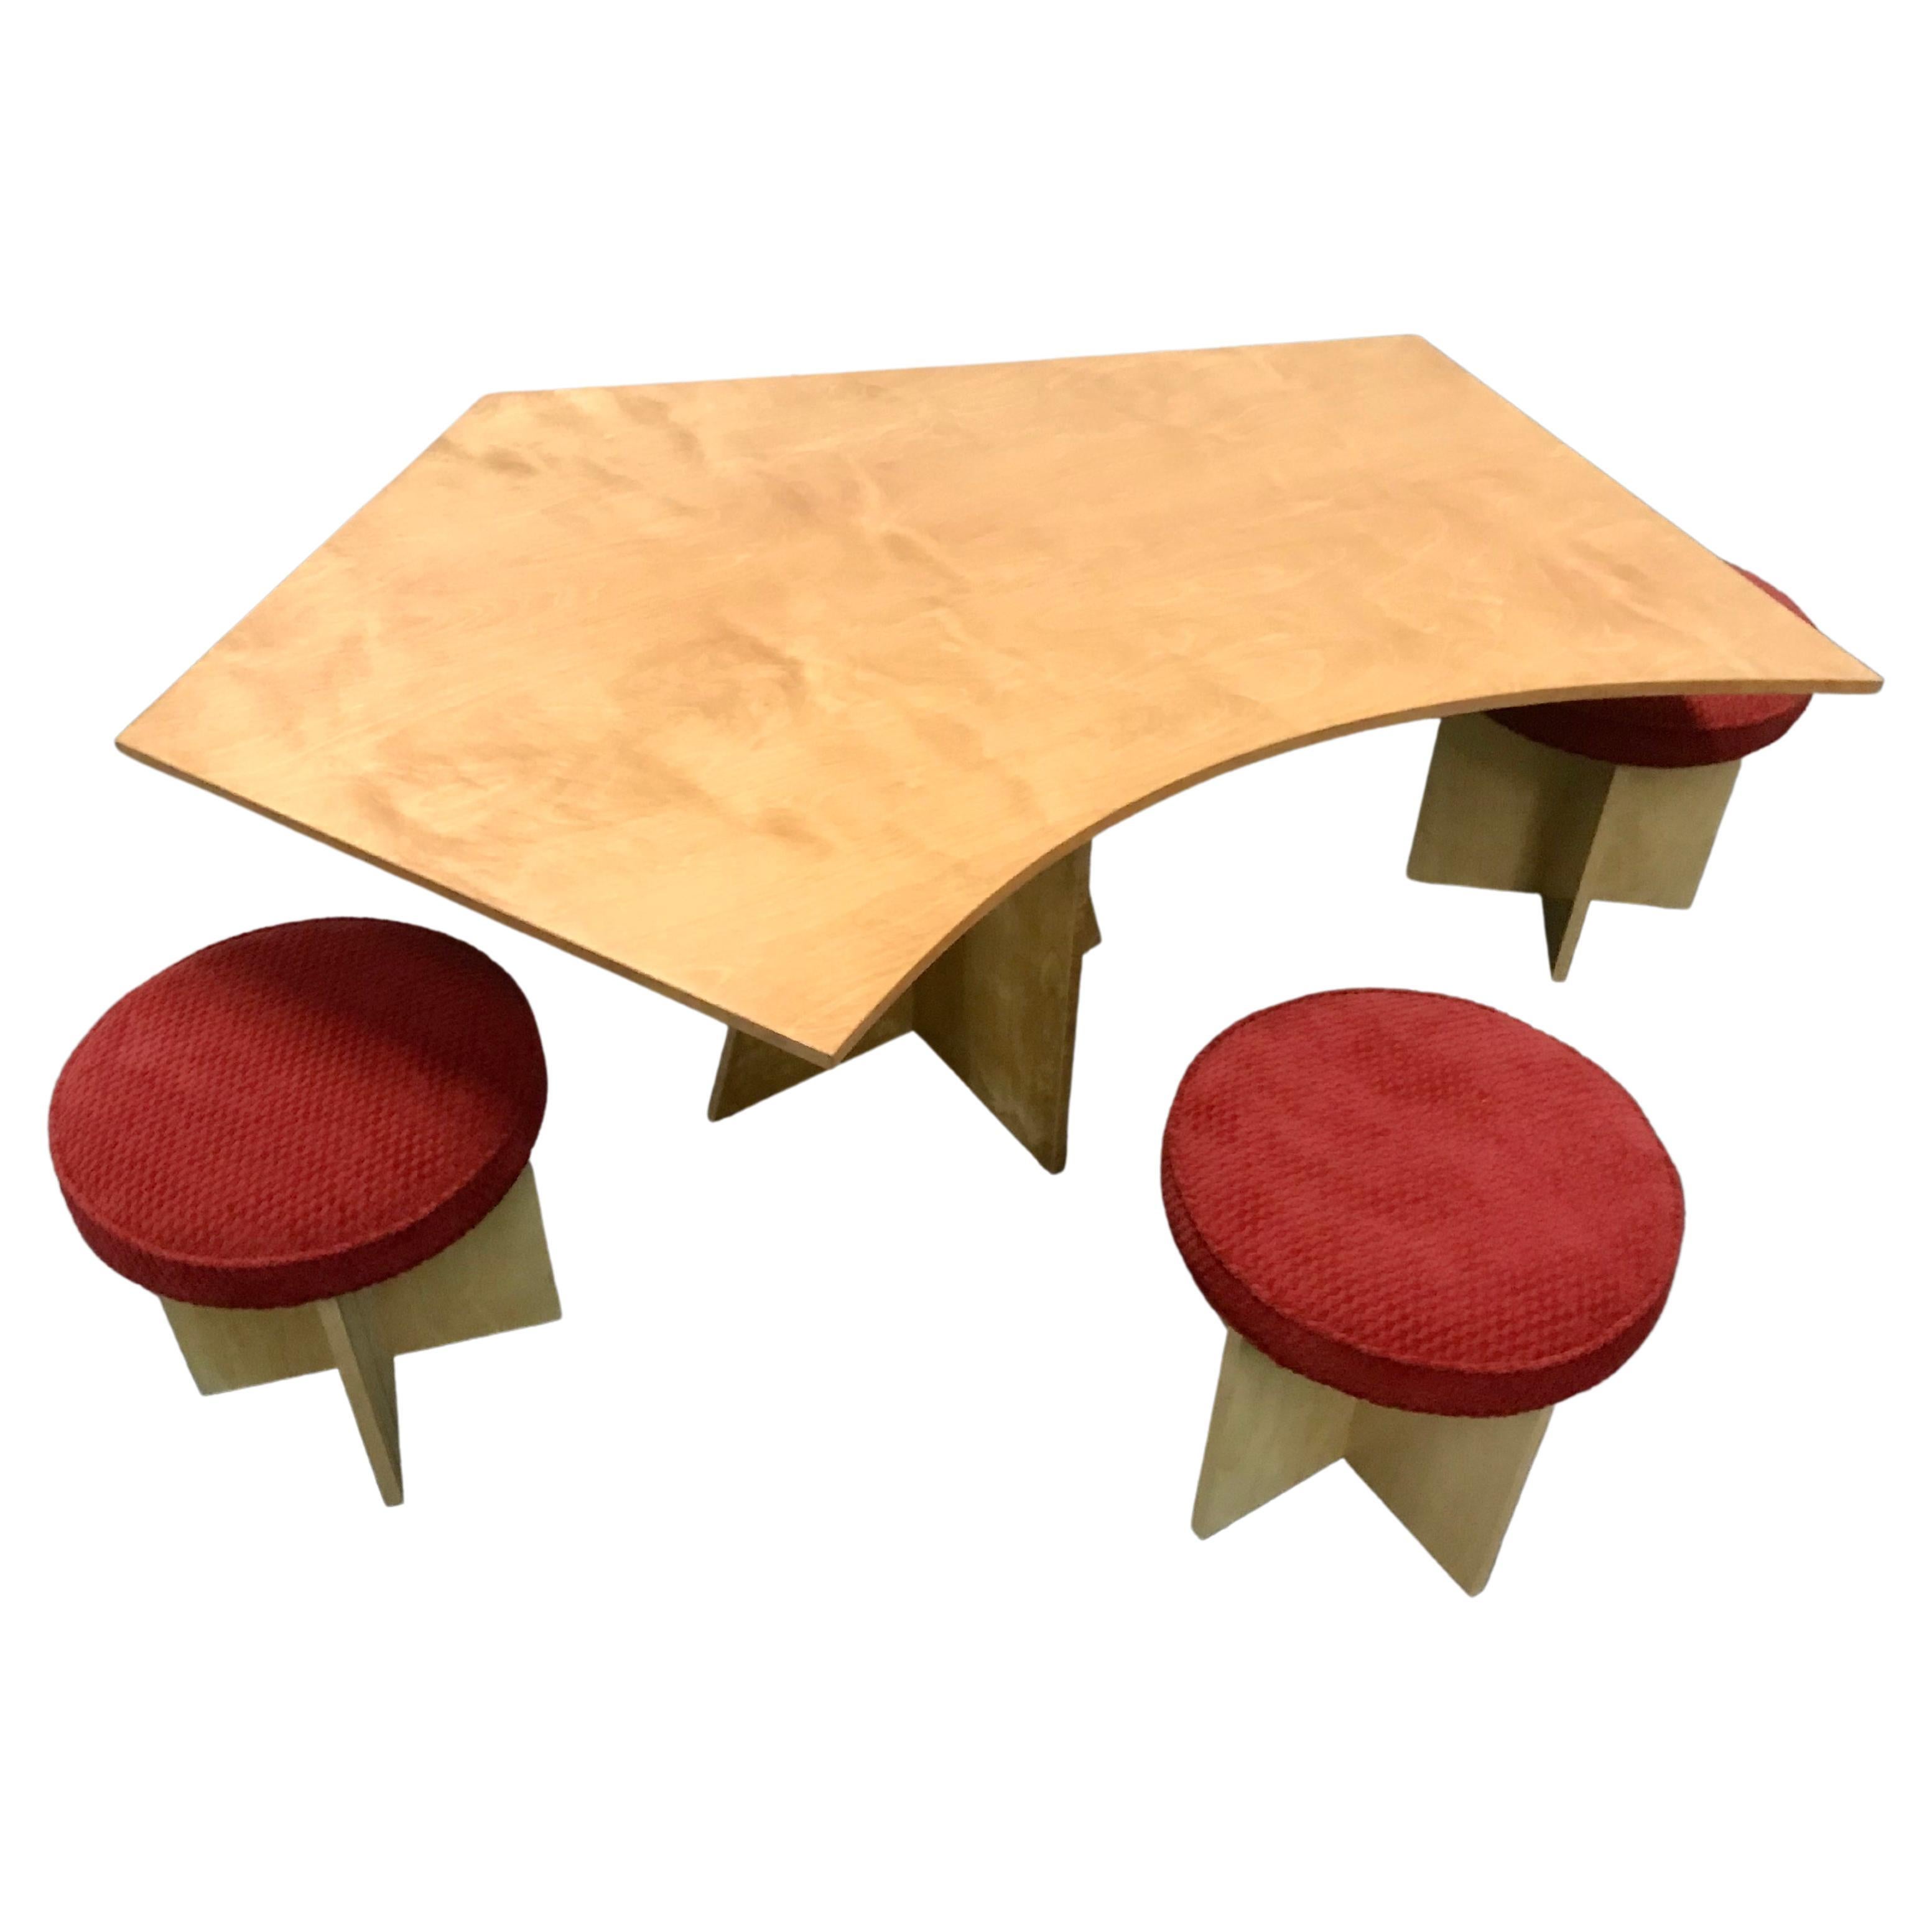 Asymmetrical Top Table with Four Stools by Di Vincente